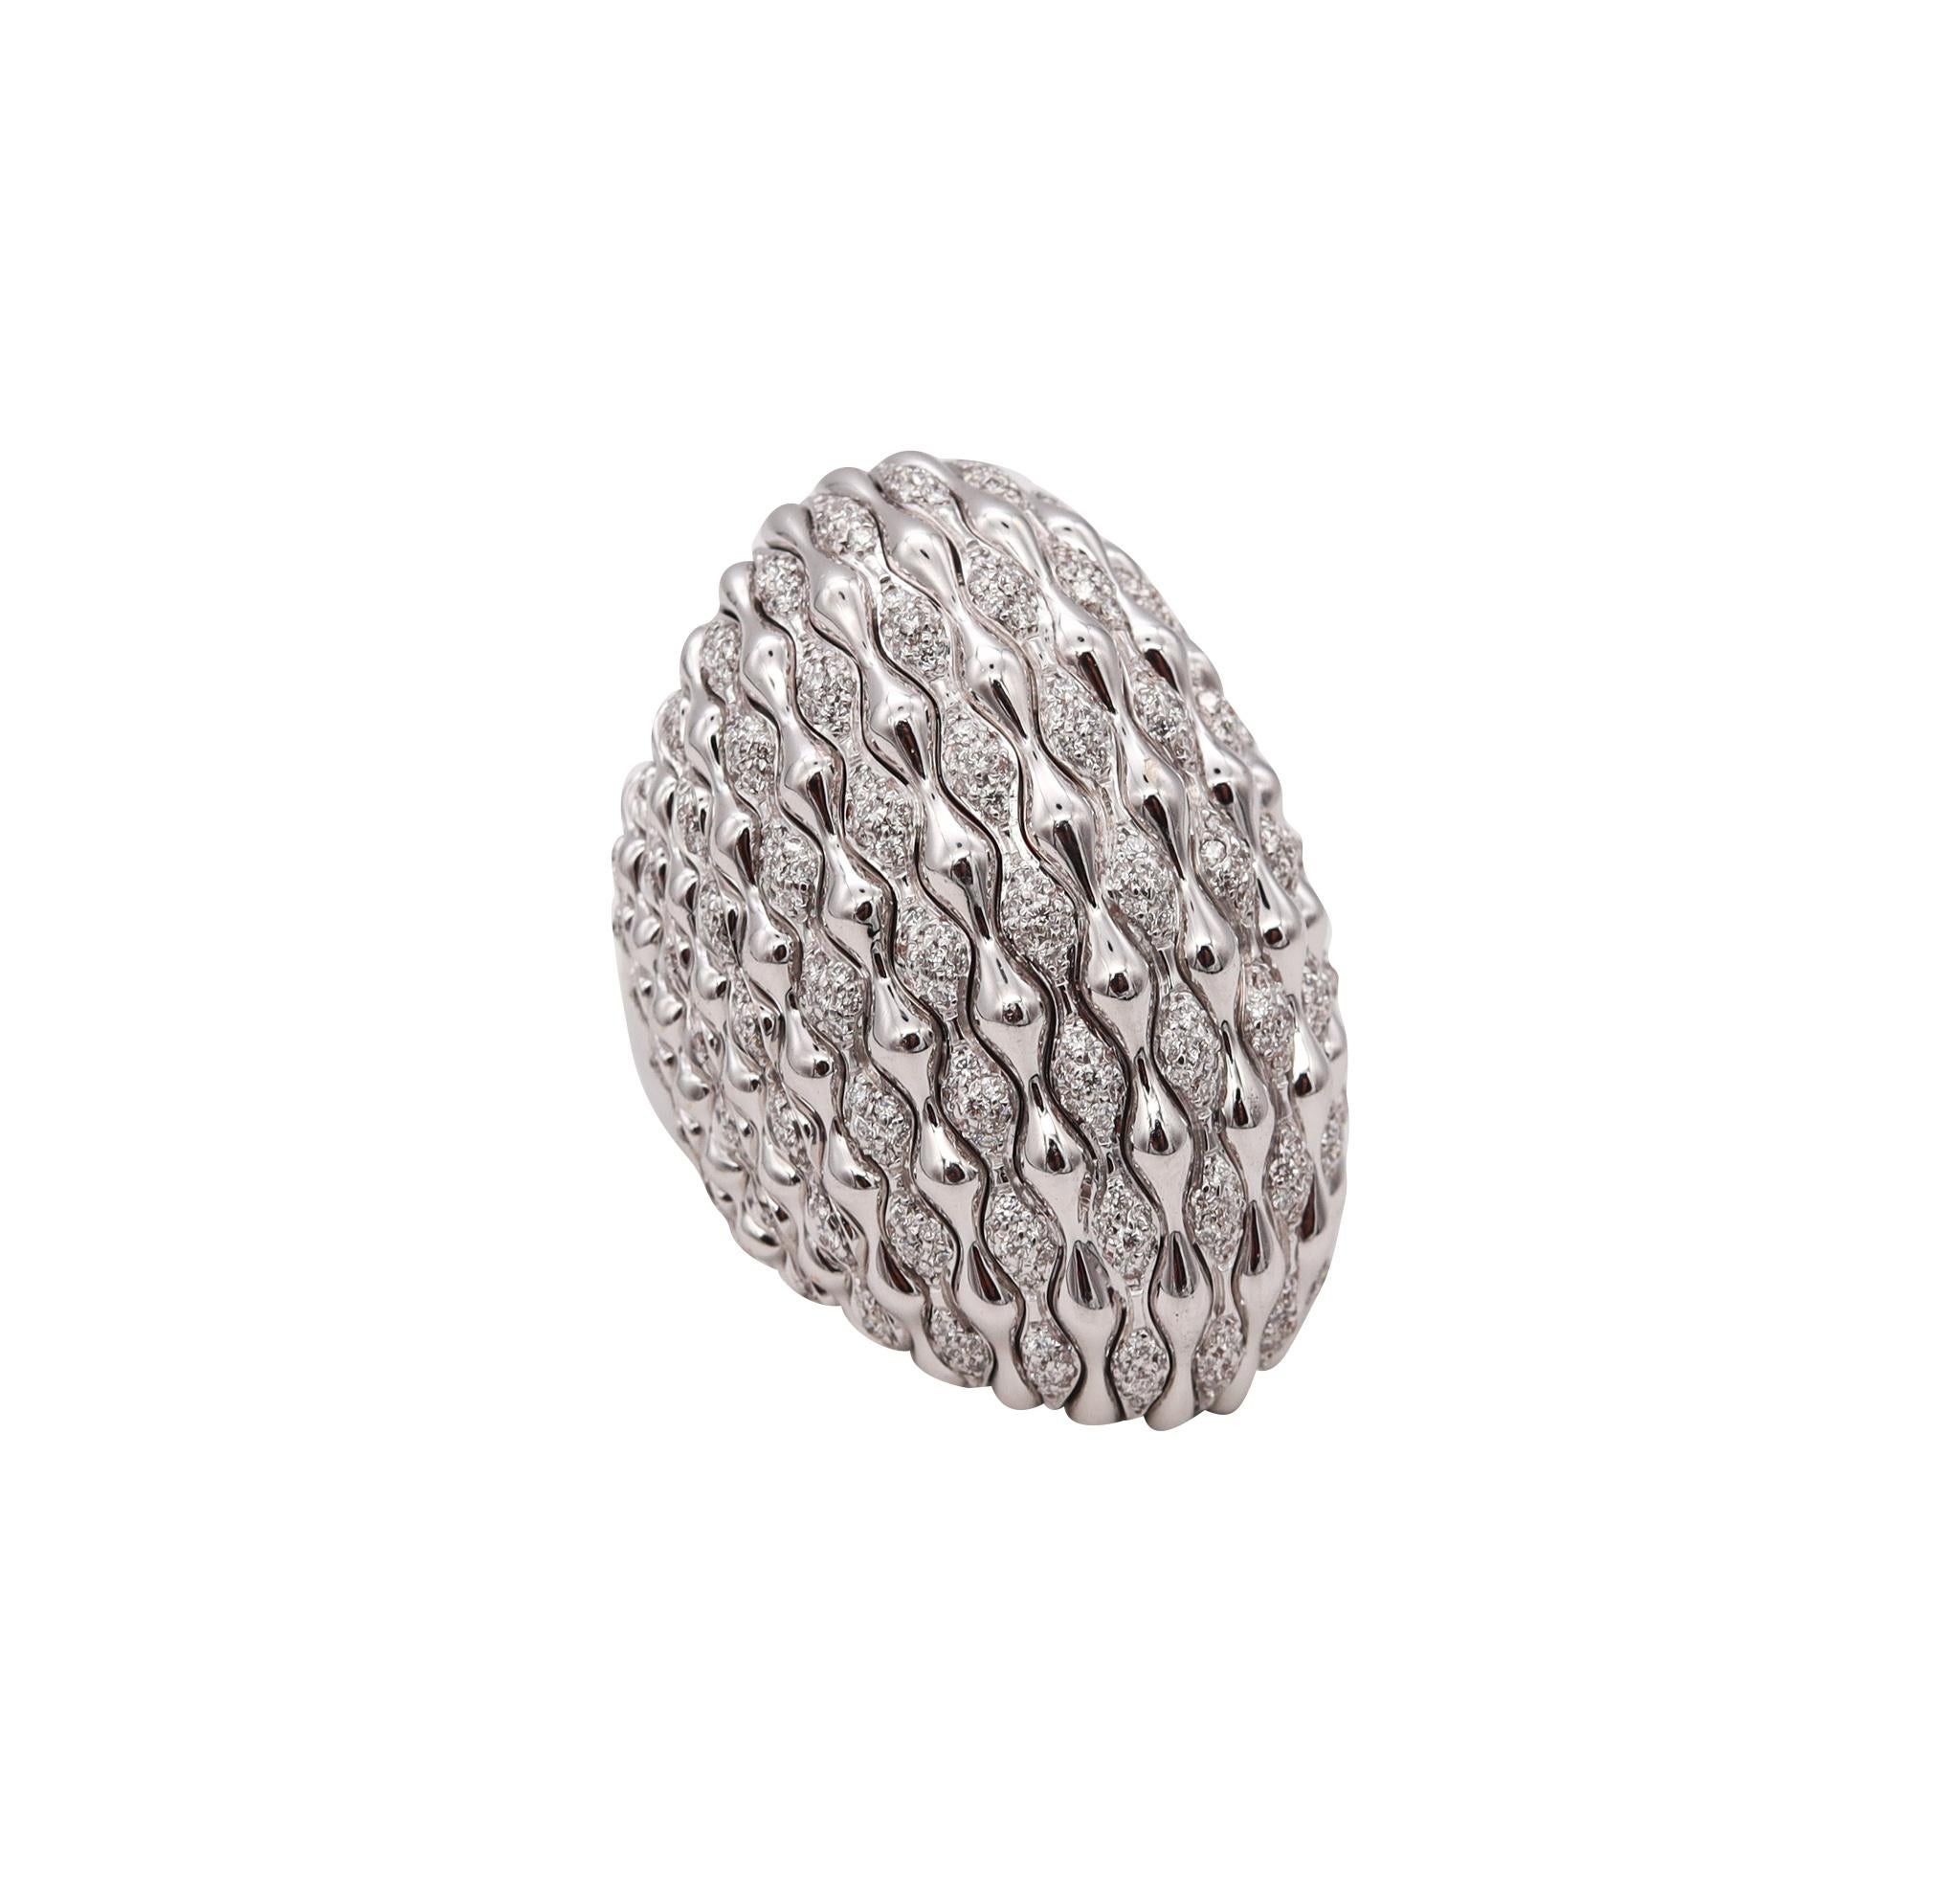 Brilliant Cut Palmiero Milano Domed Cocktail Ring In 18Kt White Gold With 4.89 Ctw Diamonds For Sale